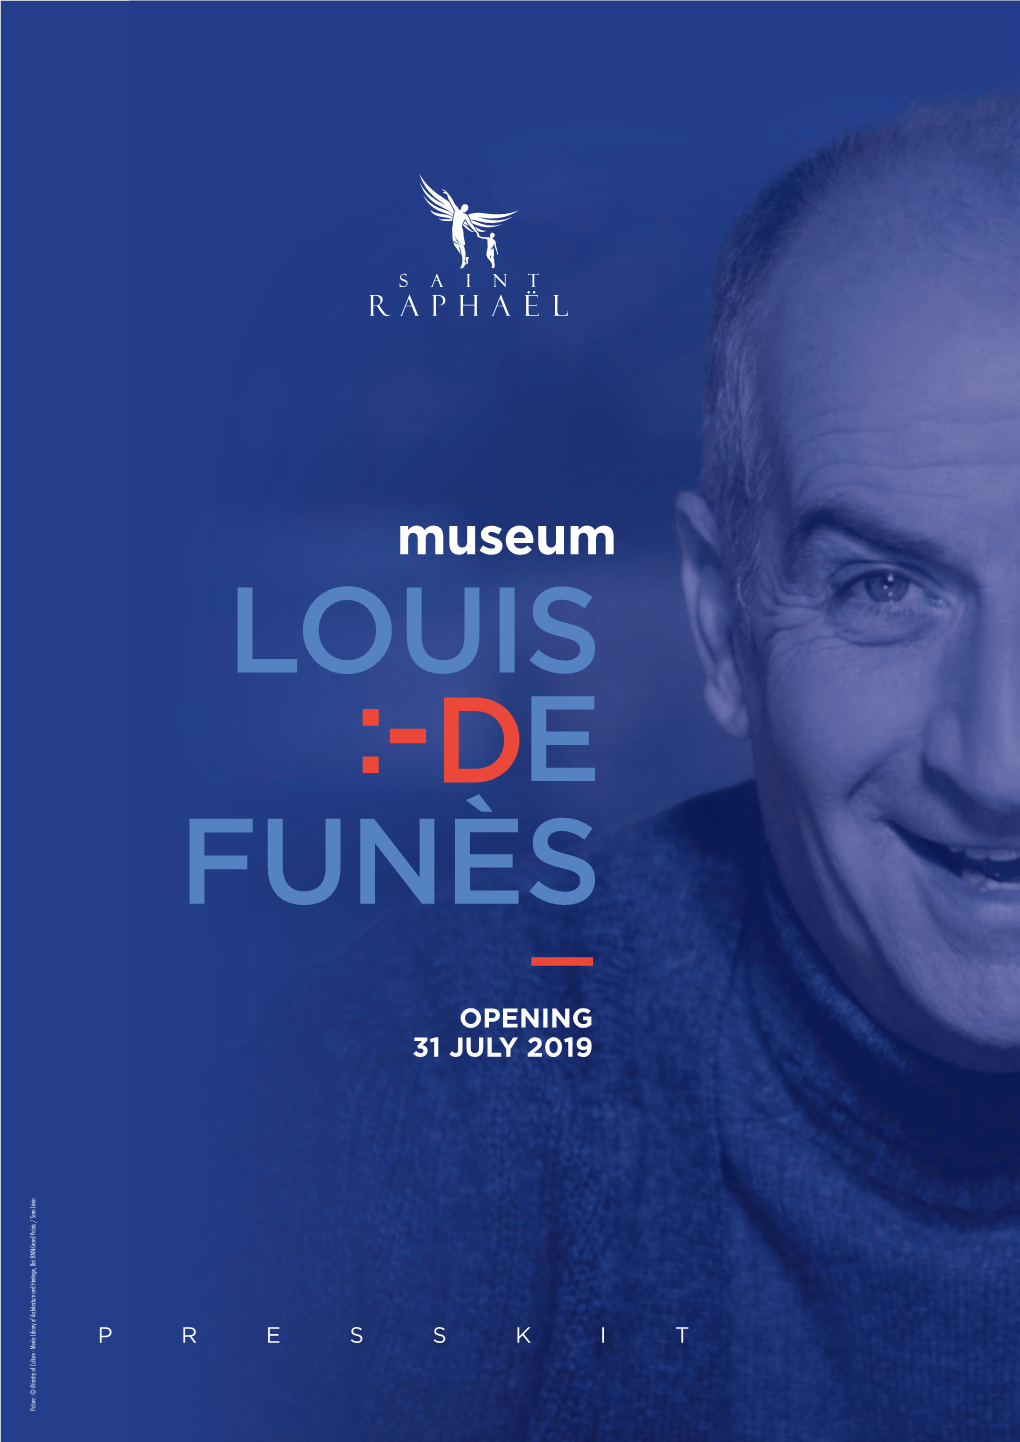 Museum to Louis De Funès Is to Reverse Decades of Dissatisfaction